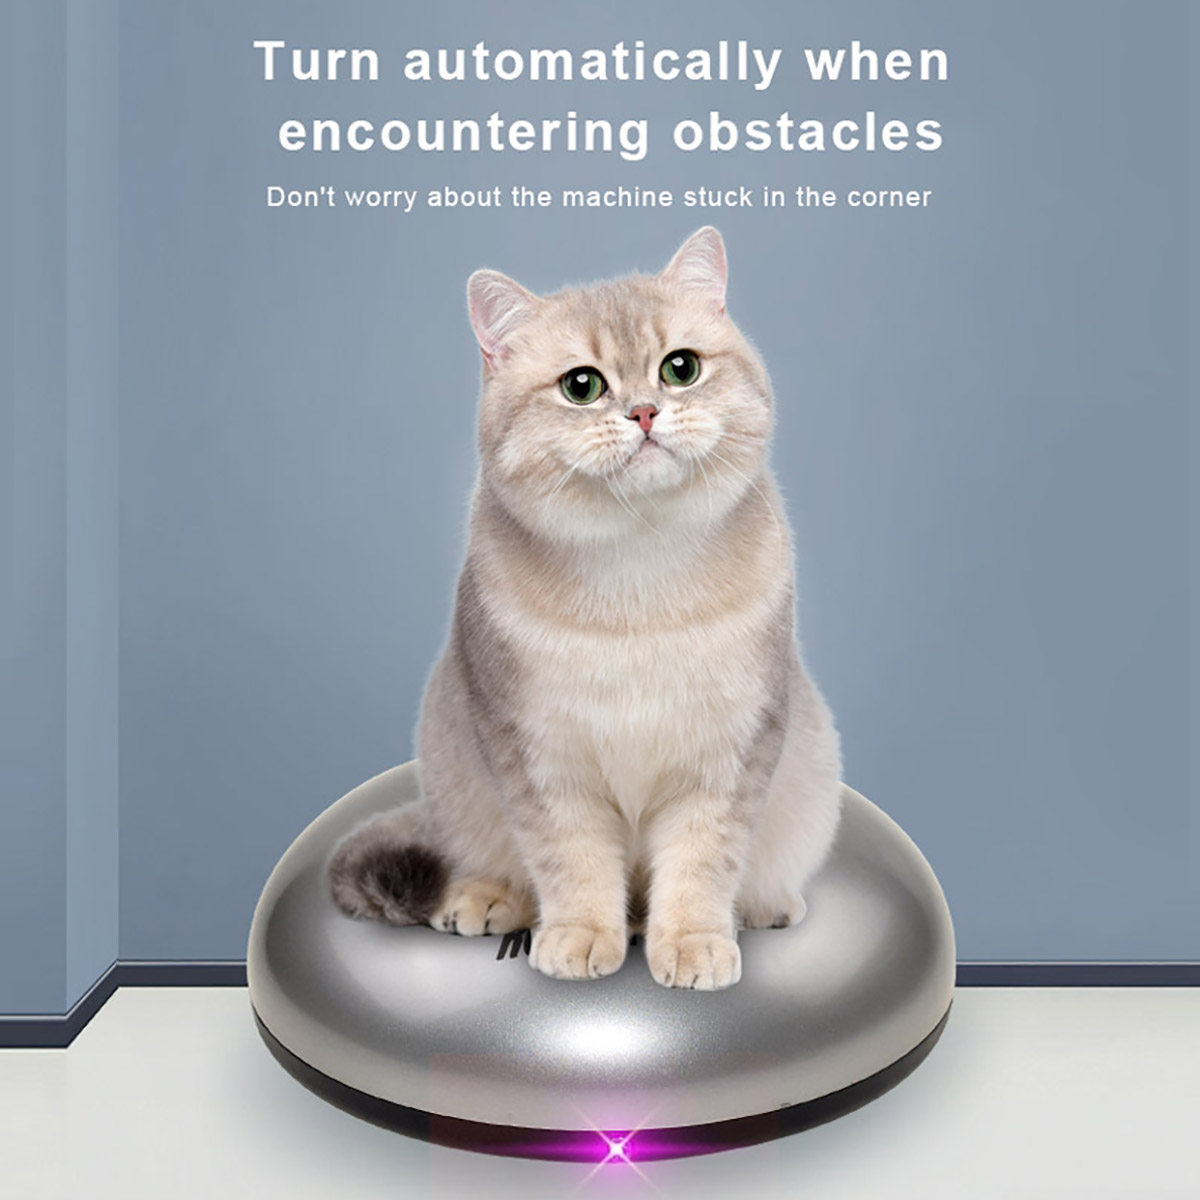 2 in 1 Smart Funny Cat Sweeper Robot Cleaner Machine Edge Auto Suction Home